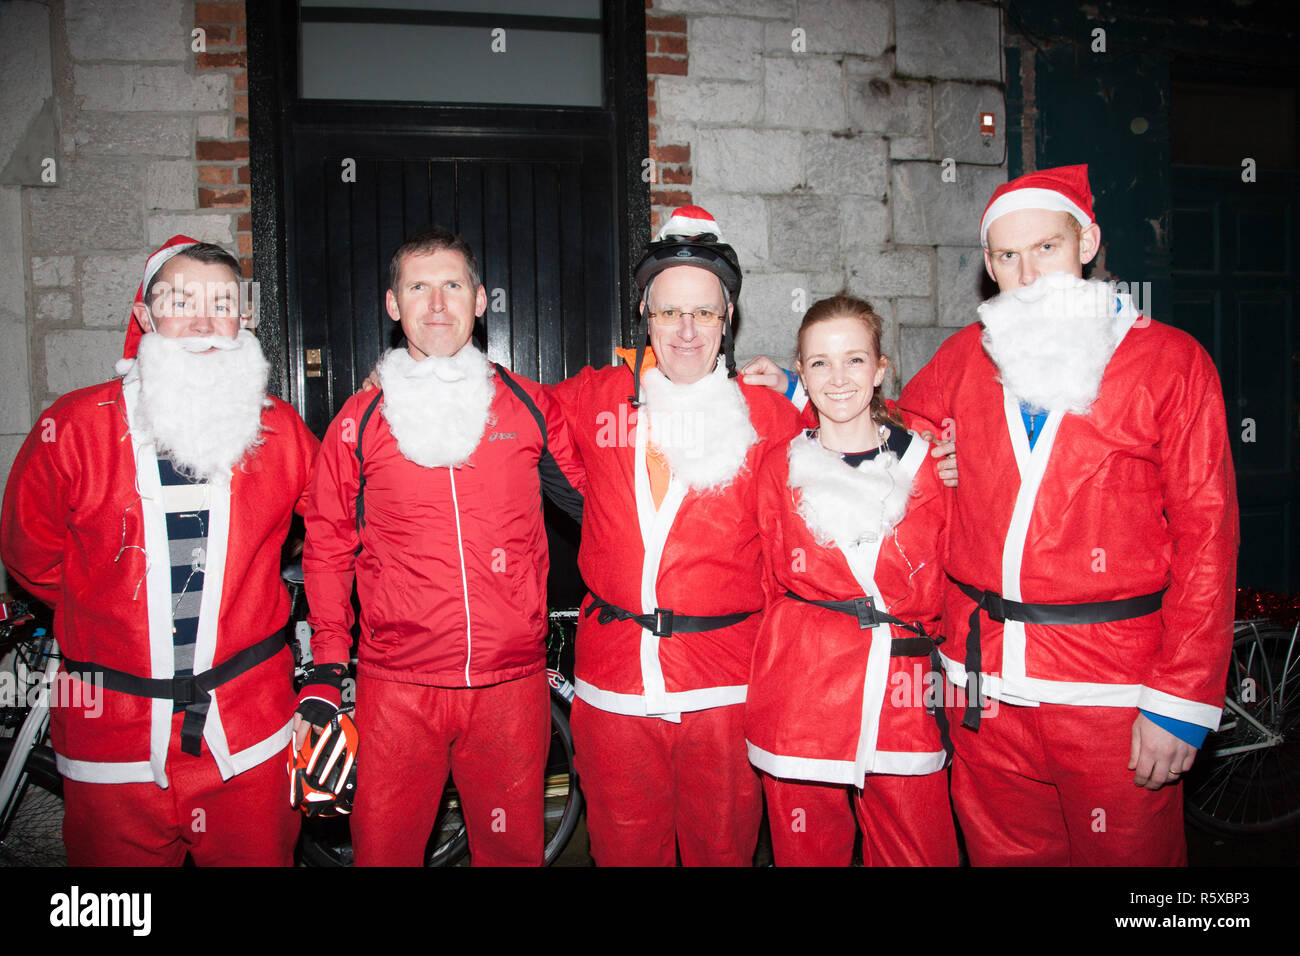 Cork, Ireland. 02nd December, 2018. Pat O'Sullivan, Brian O' Halloran, Tom Noonan, Linda Kellegher and Ronan Geary who took part in the Santa Cycle to raise funds for the medical support group Straight Ahead which provides surgery, support and medical equipment for children with orthopaedic conditions in Cork, Ireland. Credit: David Creedon/Alamy Live News Stock Photo